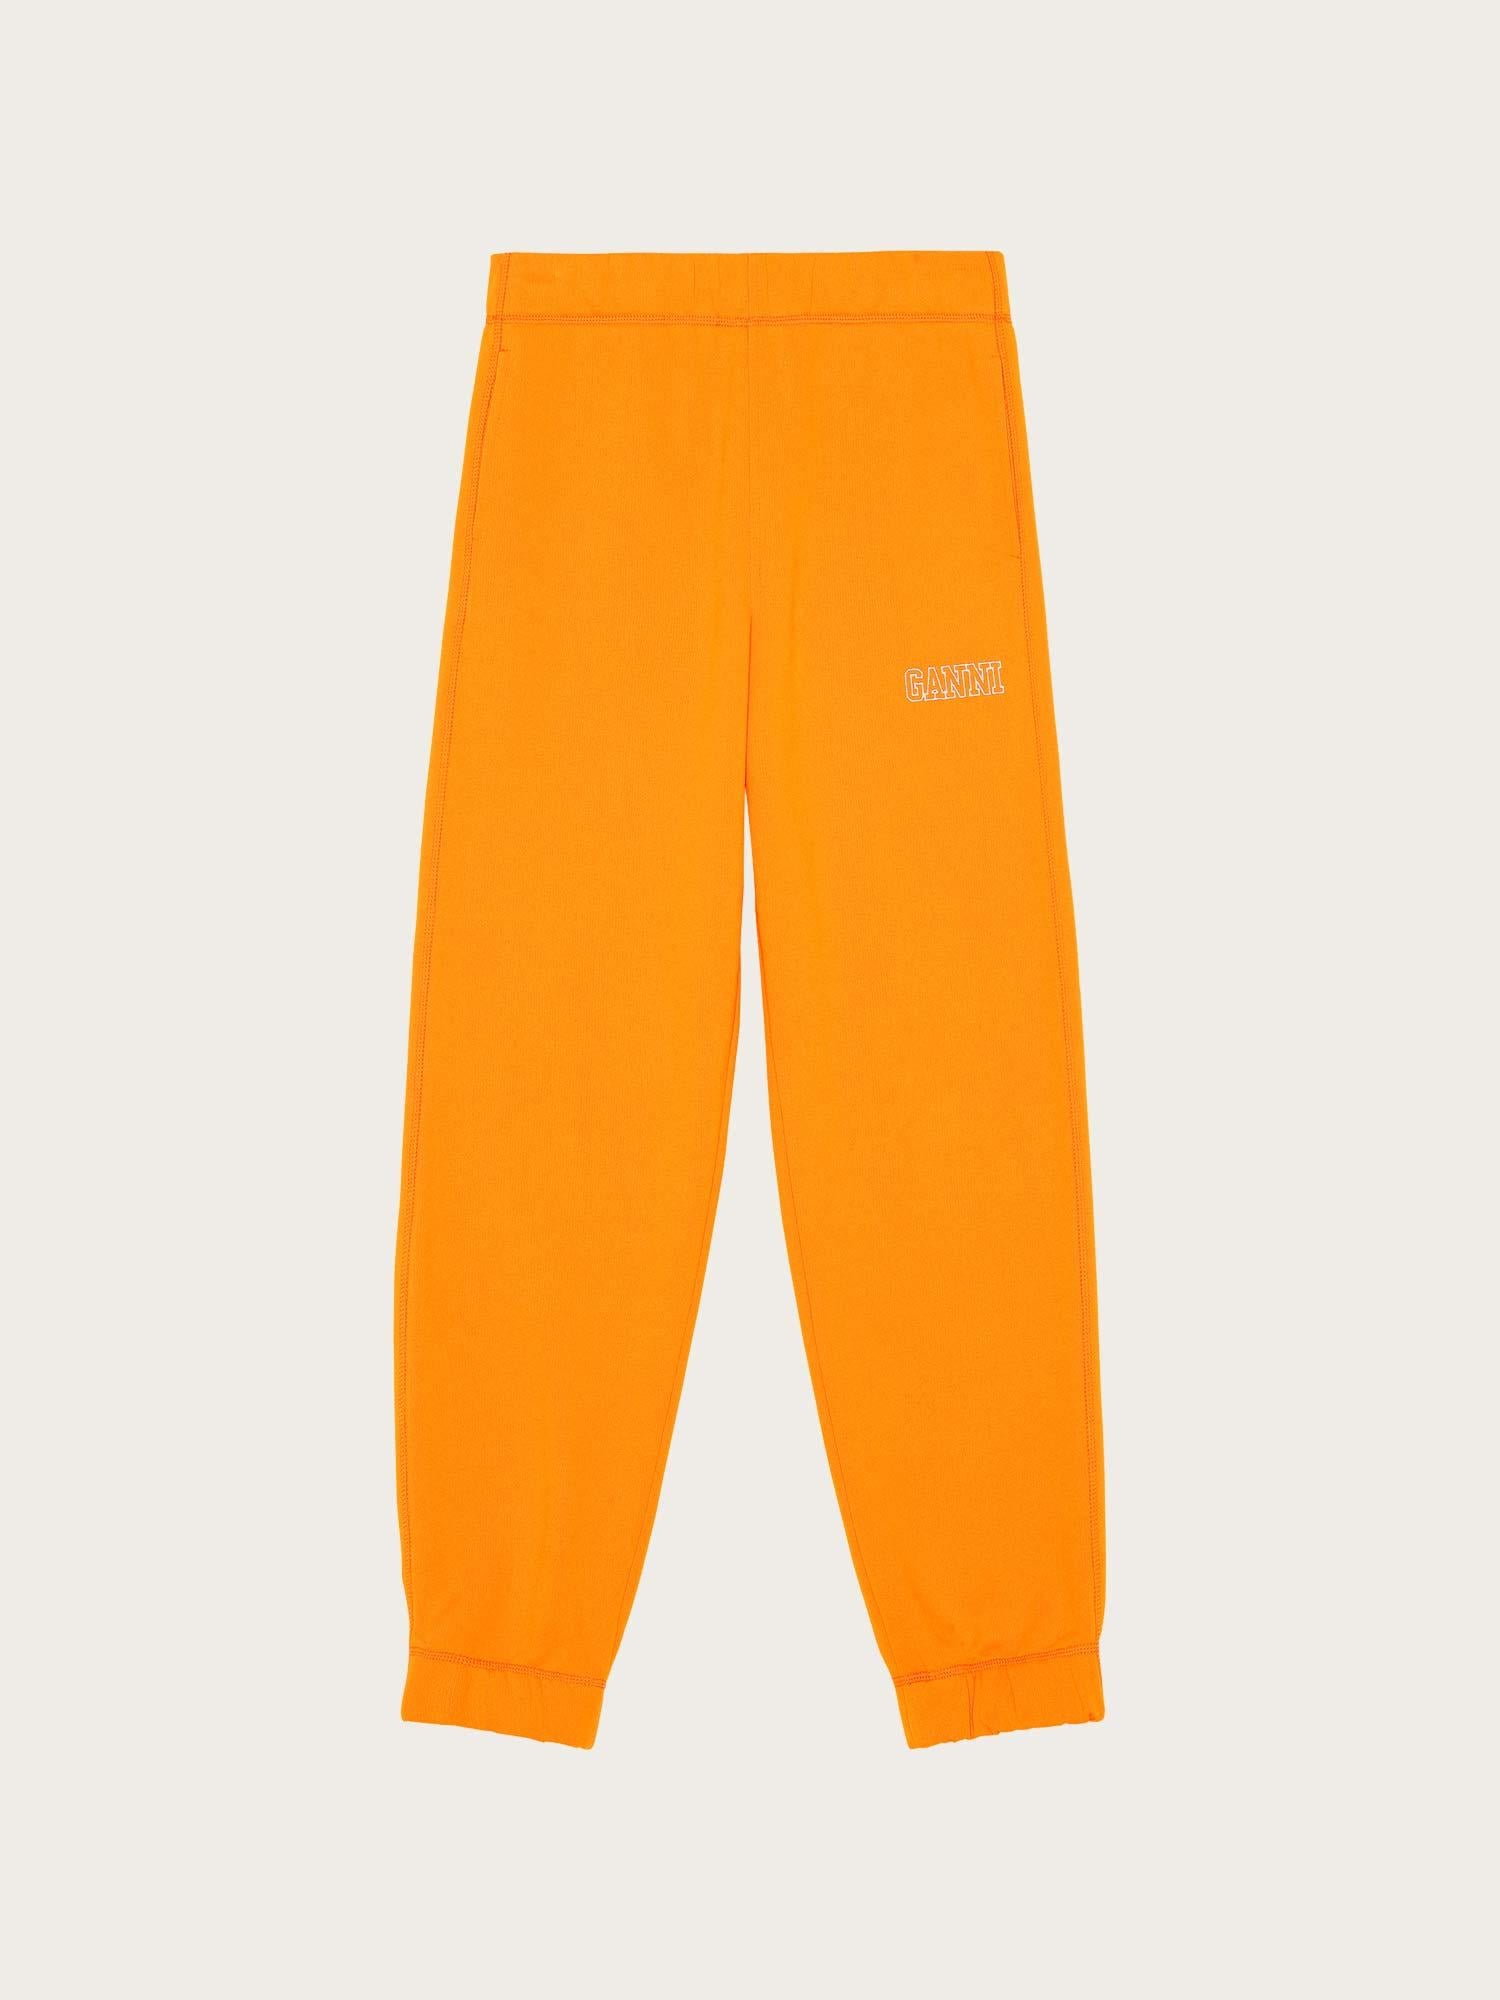 T3018 Software Isoli Elasticated Pants - Bright